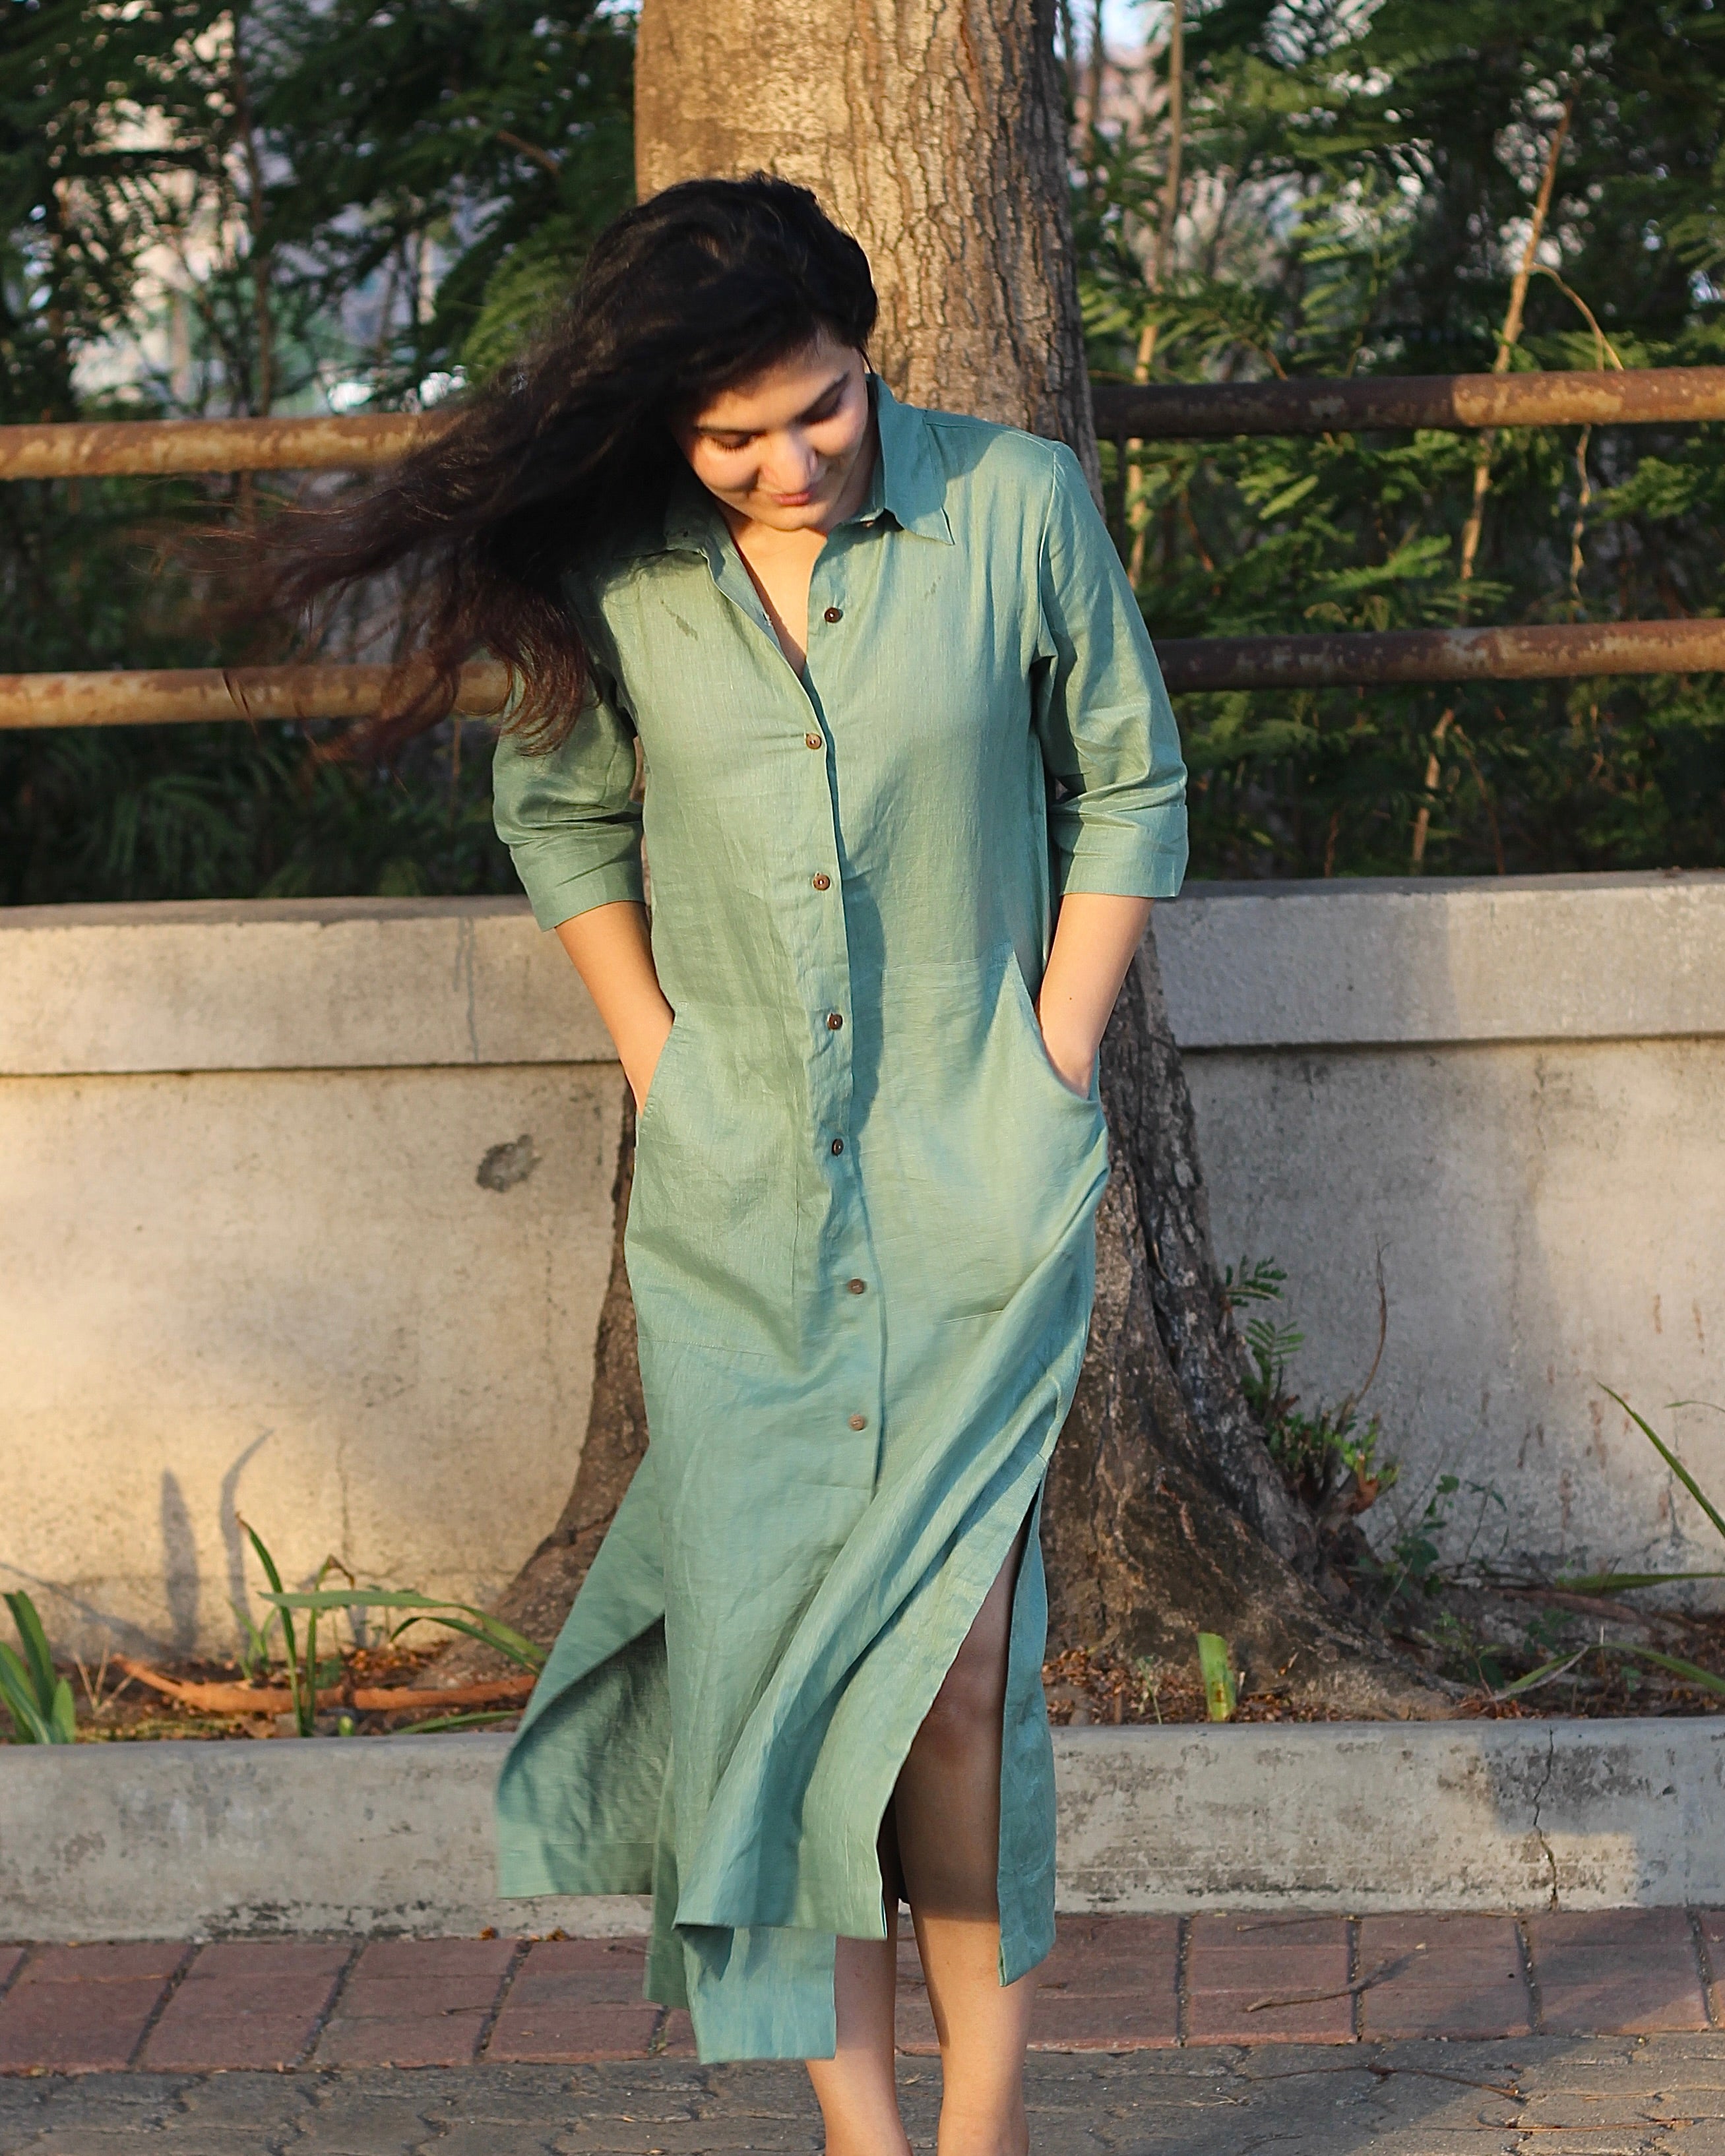 Sea Green Premium Linen Long Shirt Dress with Shirt Collar, 3/4 Sleeves, Unique Front Pockets, and Side Cut